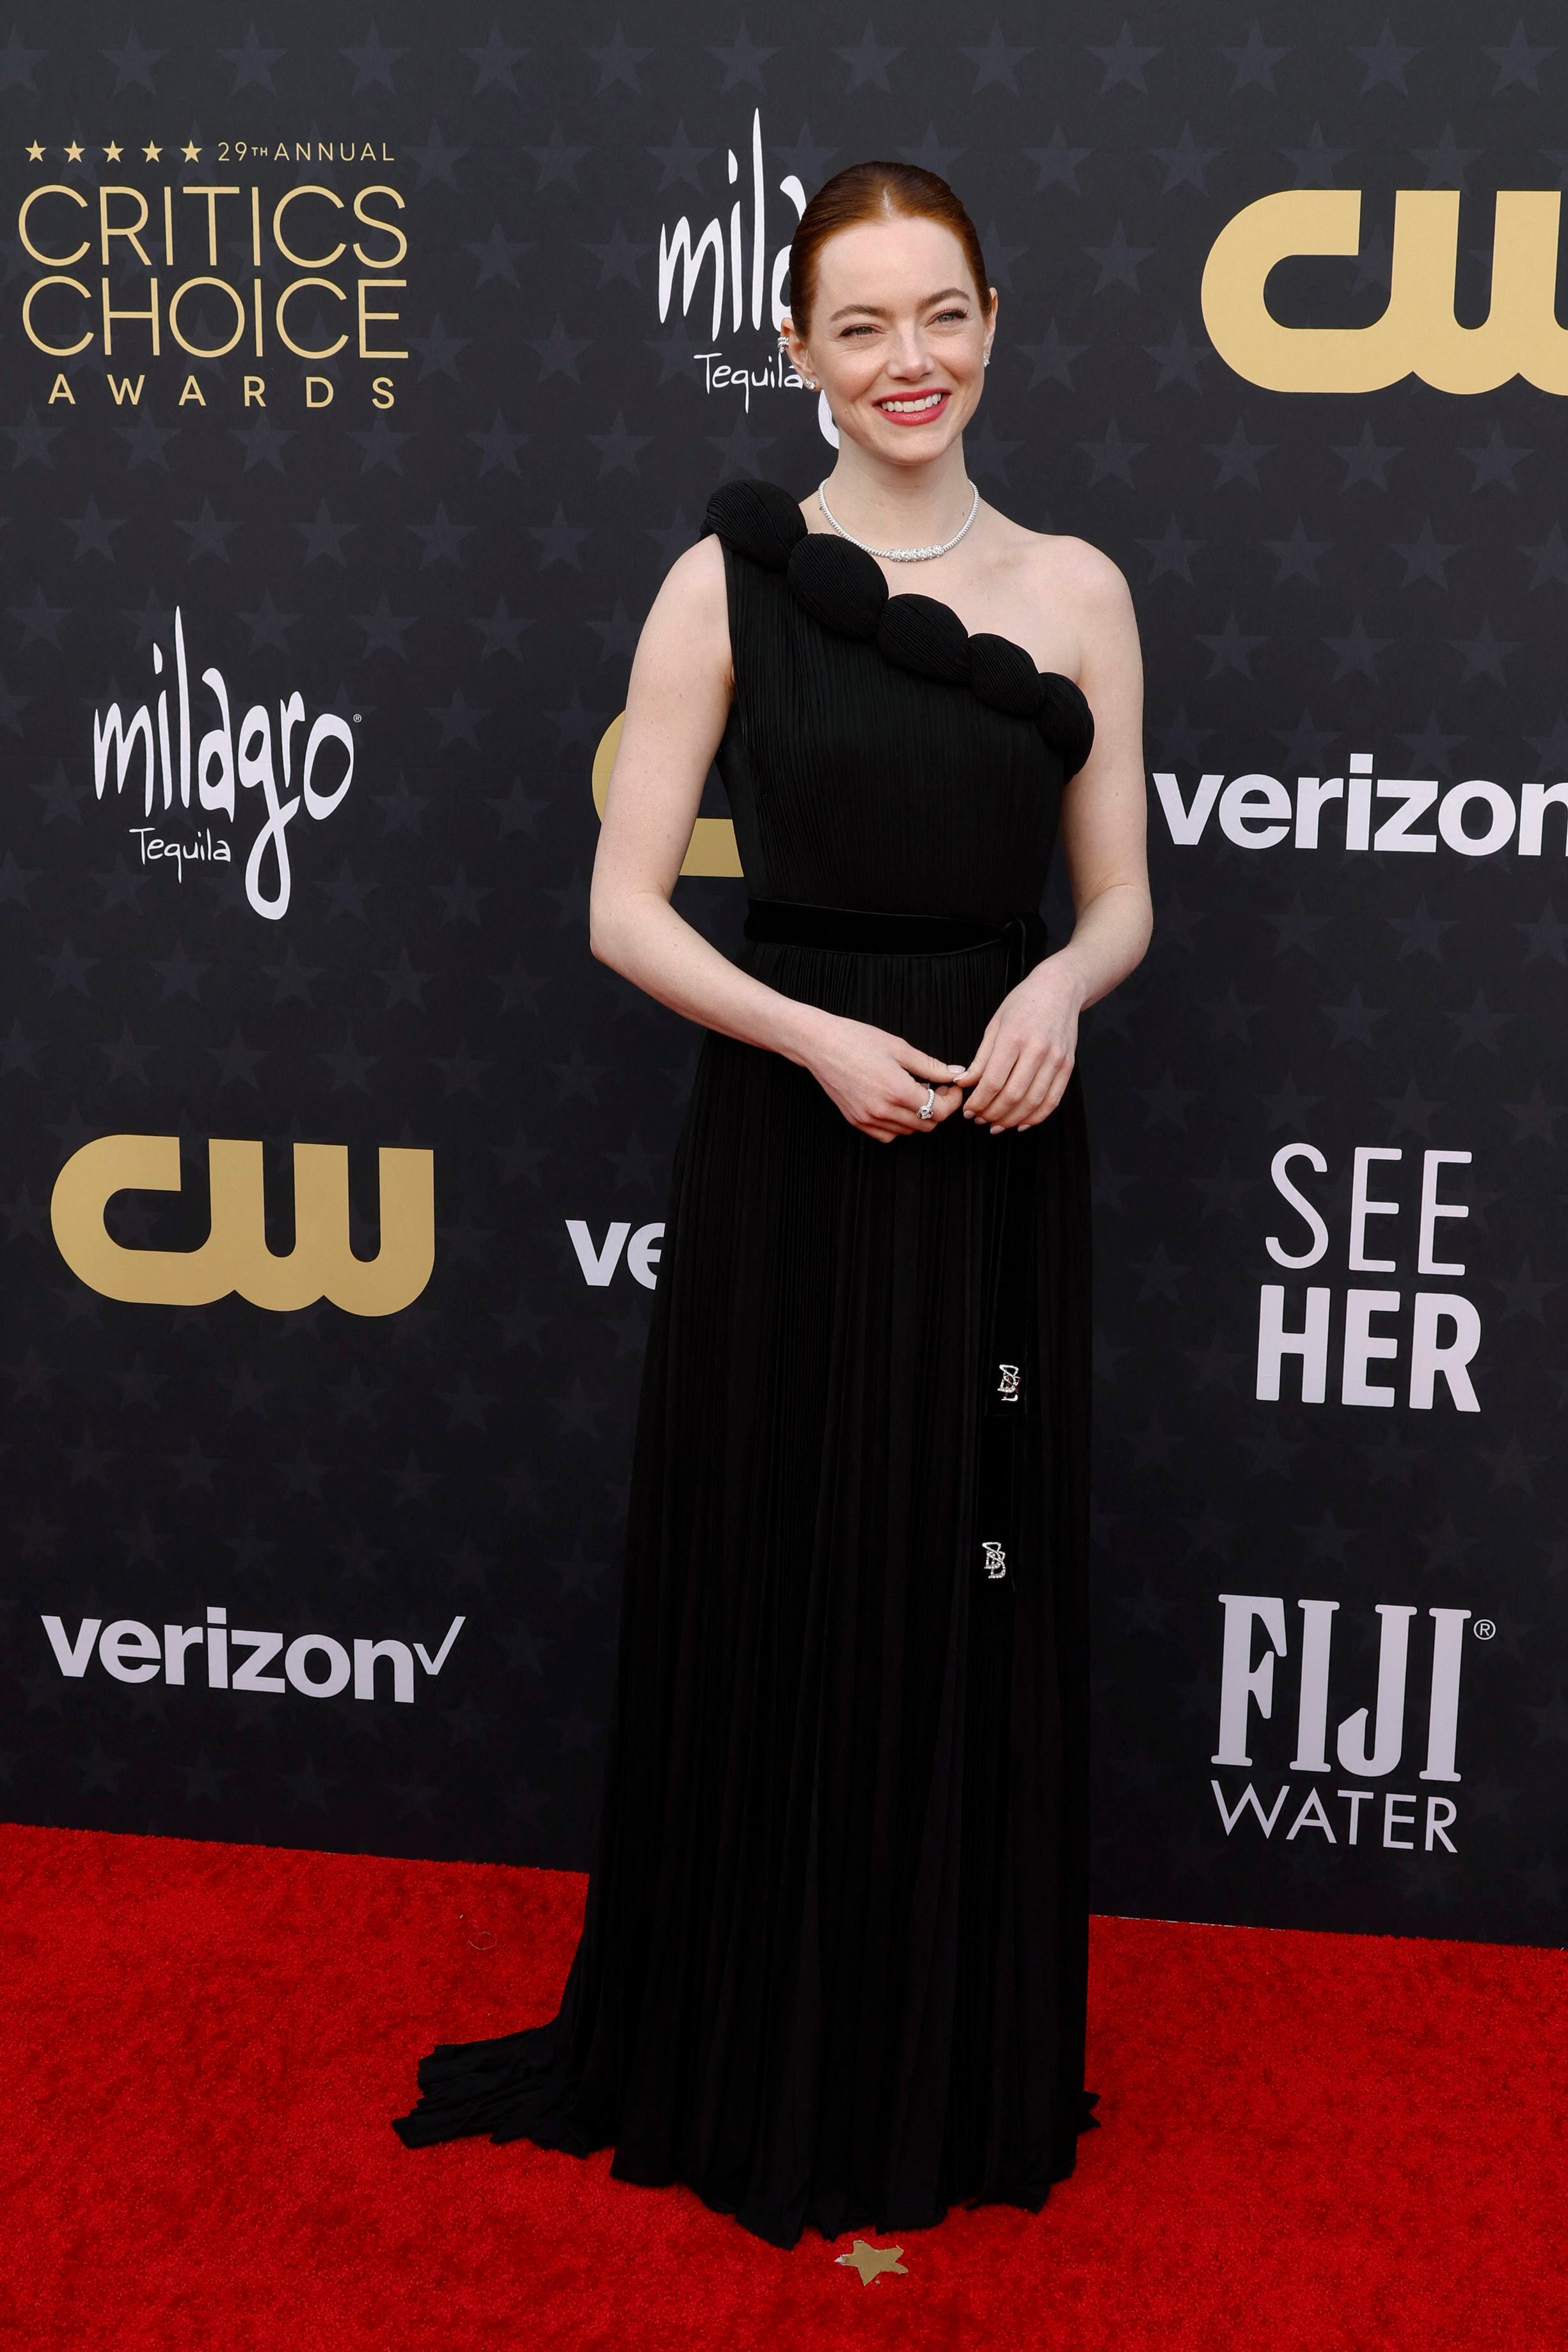 SANTA MONICA, CALIFORNIA - JANUARY 14: Emma Stone attends the 29th Annual Critics Choice Awards at Barker Hangar on January 14, 2024 in Santa Monica, California.   Frazer Harrison/Getty Images/AFP (Photo by Frazer Harrison / GETTY IMAGES NORTH AMERICA / Getty Images via AFP)